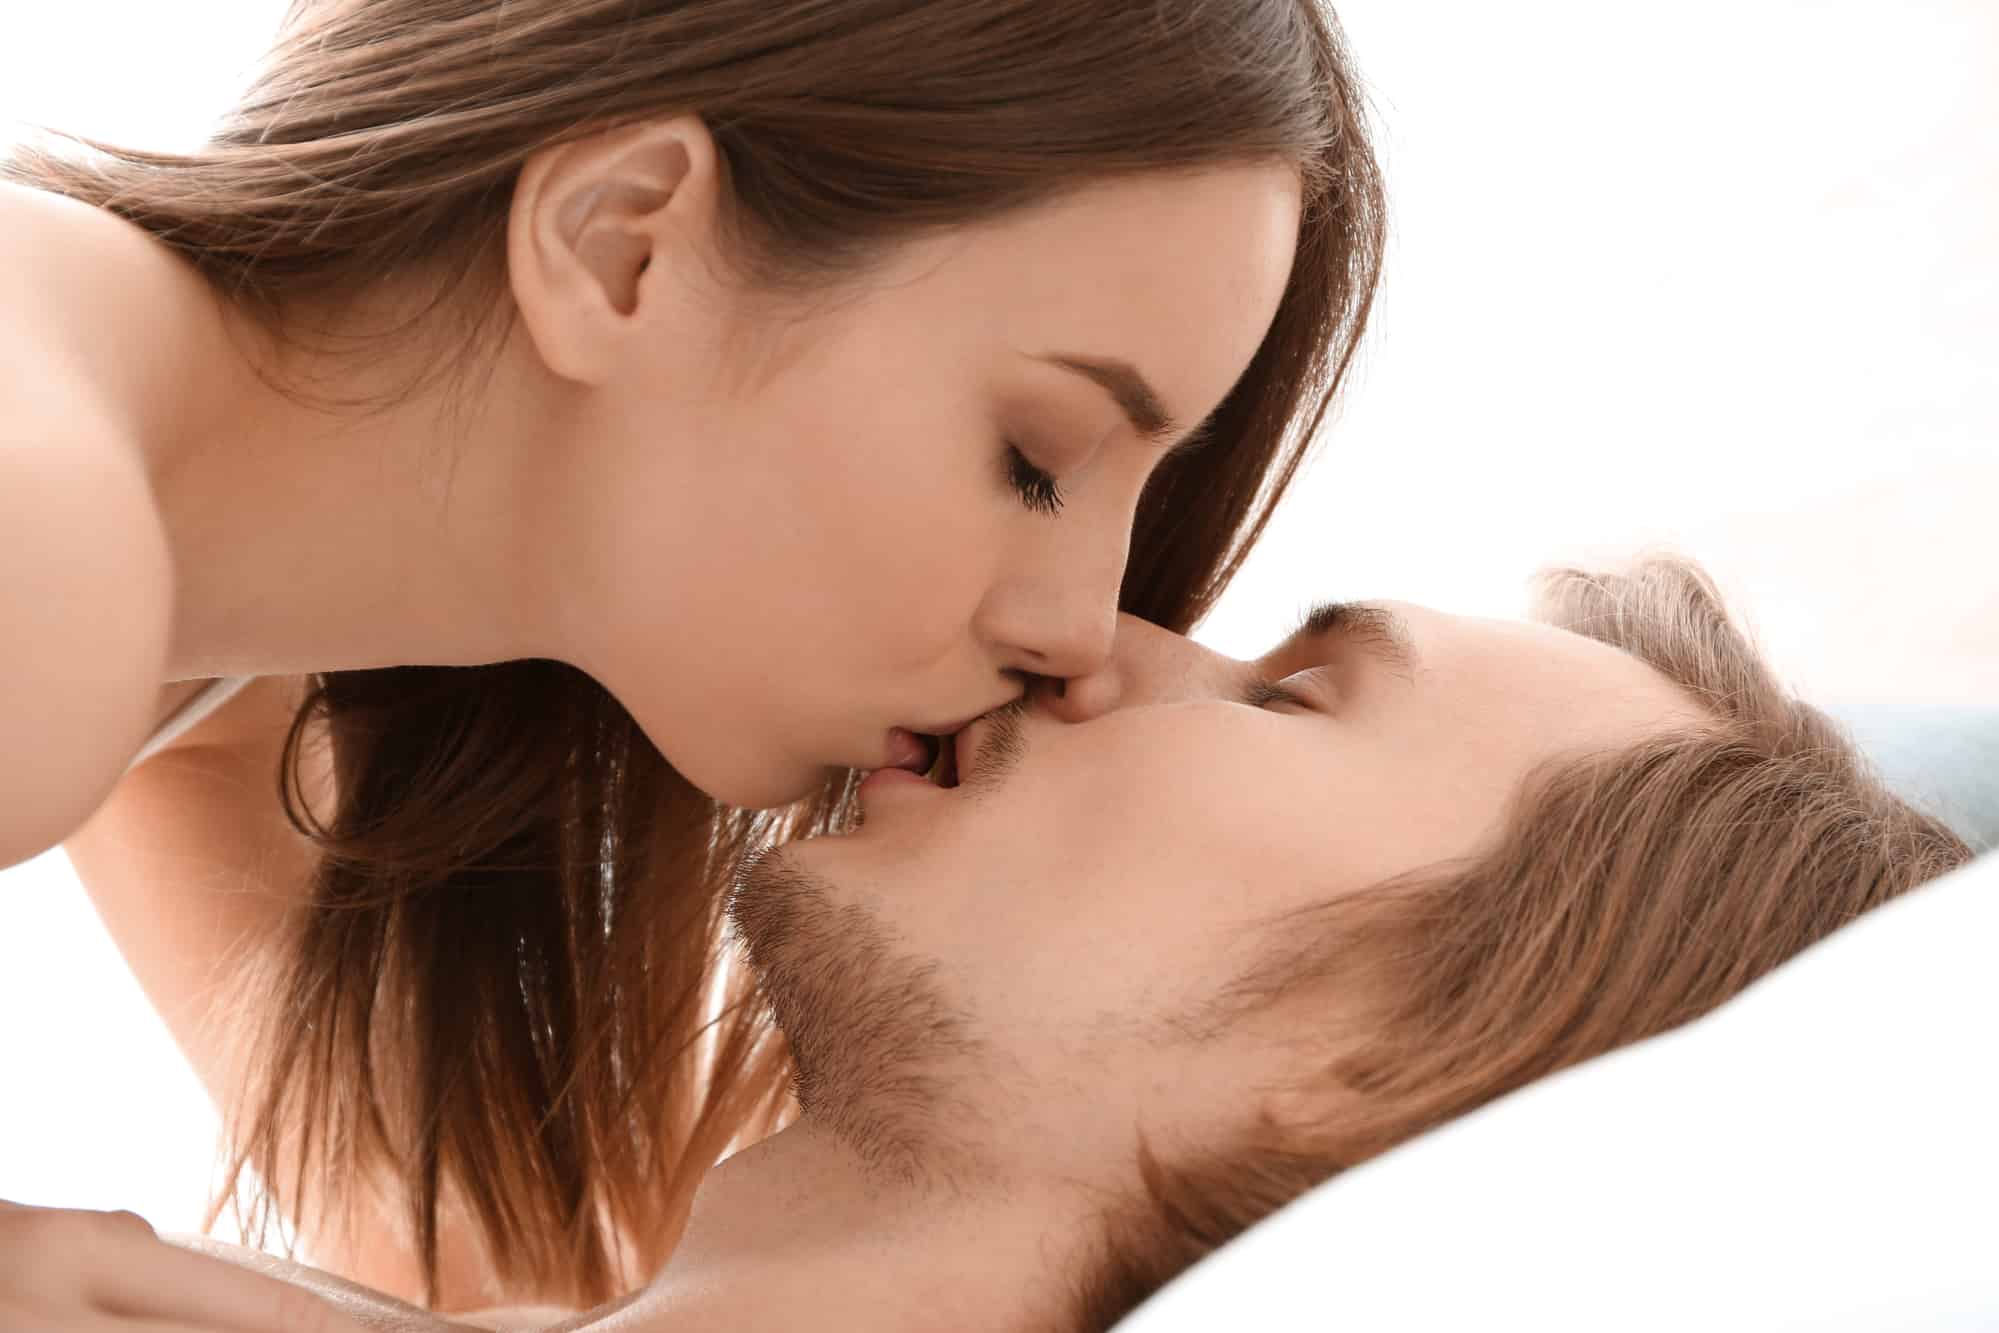 Passionate Ways To Kiss Your Boyfriend That Will Drive Him Crazy - LoveDeva...